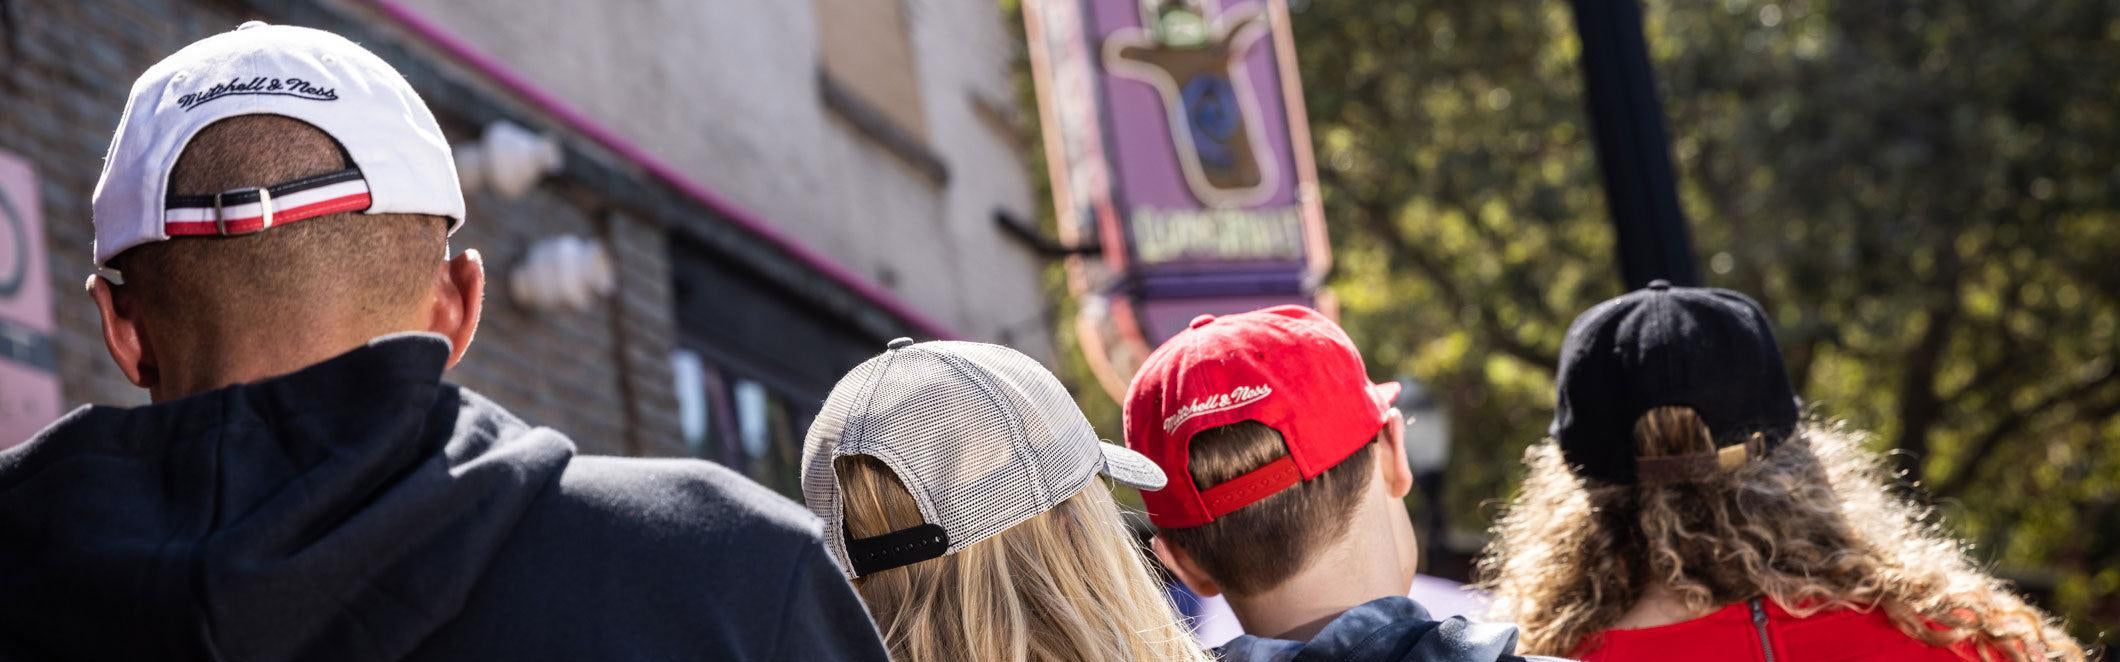 back of Trail Blazers snapback hats in front of voodoo donunts